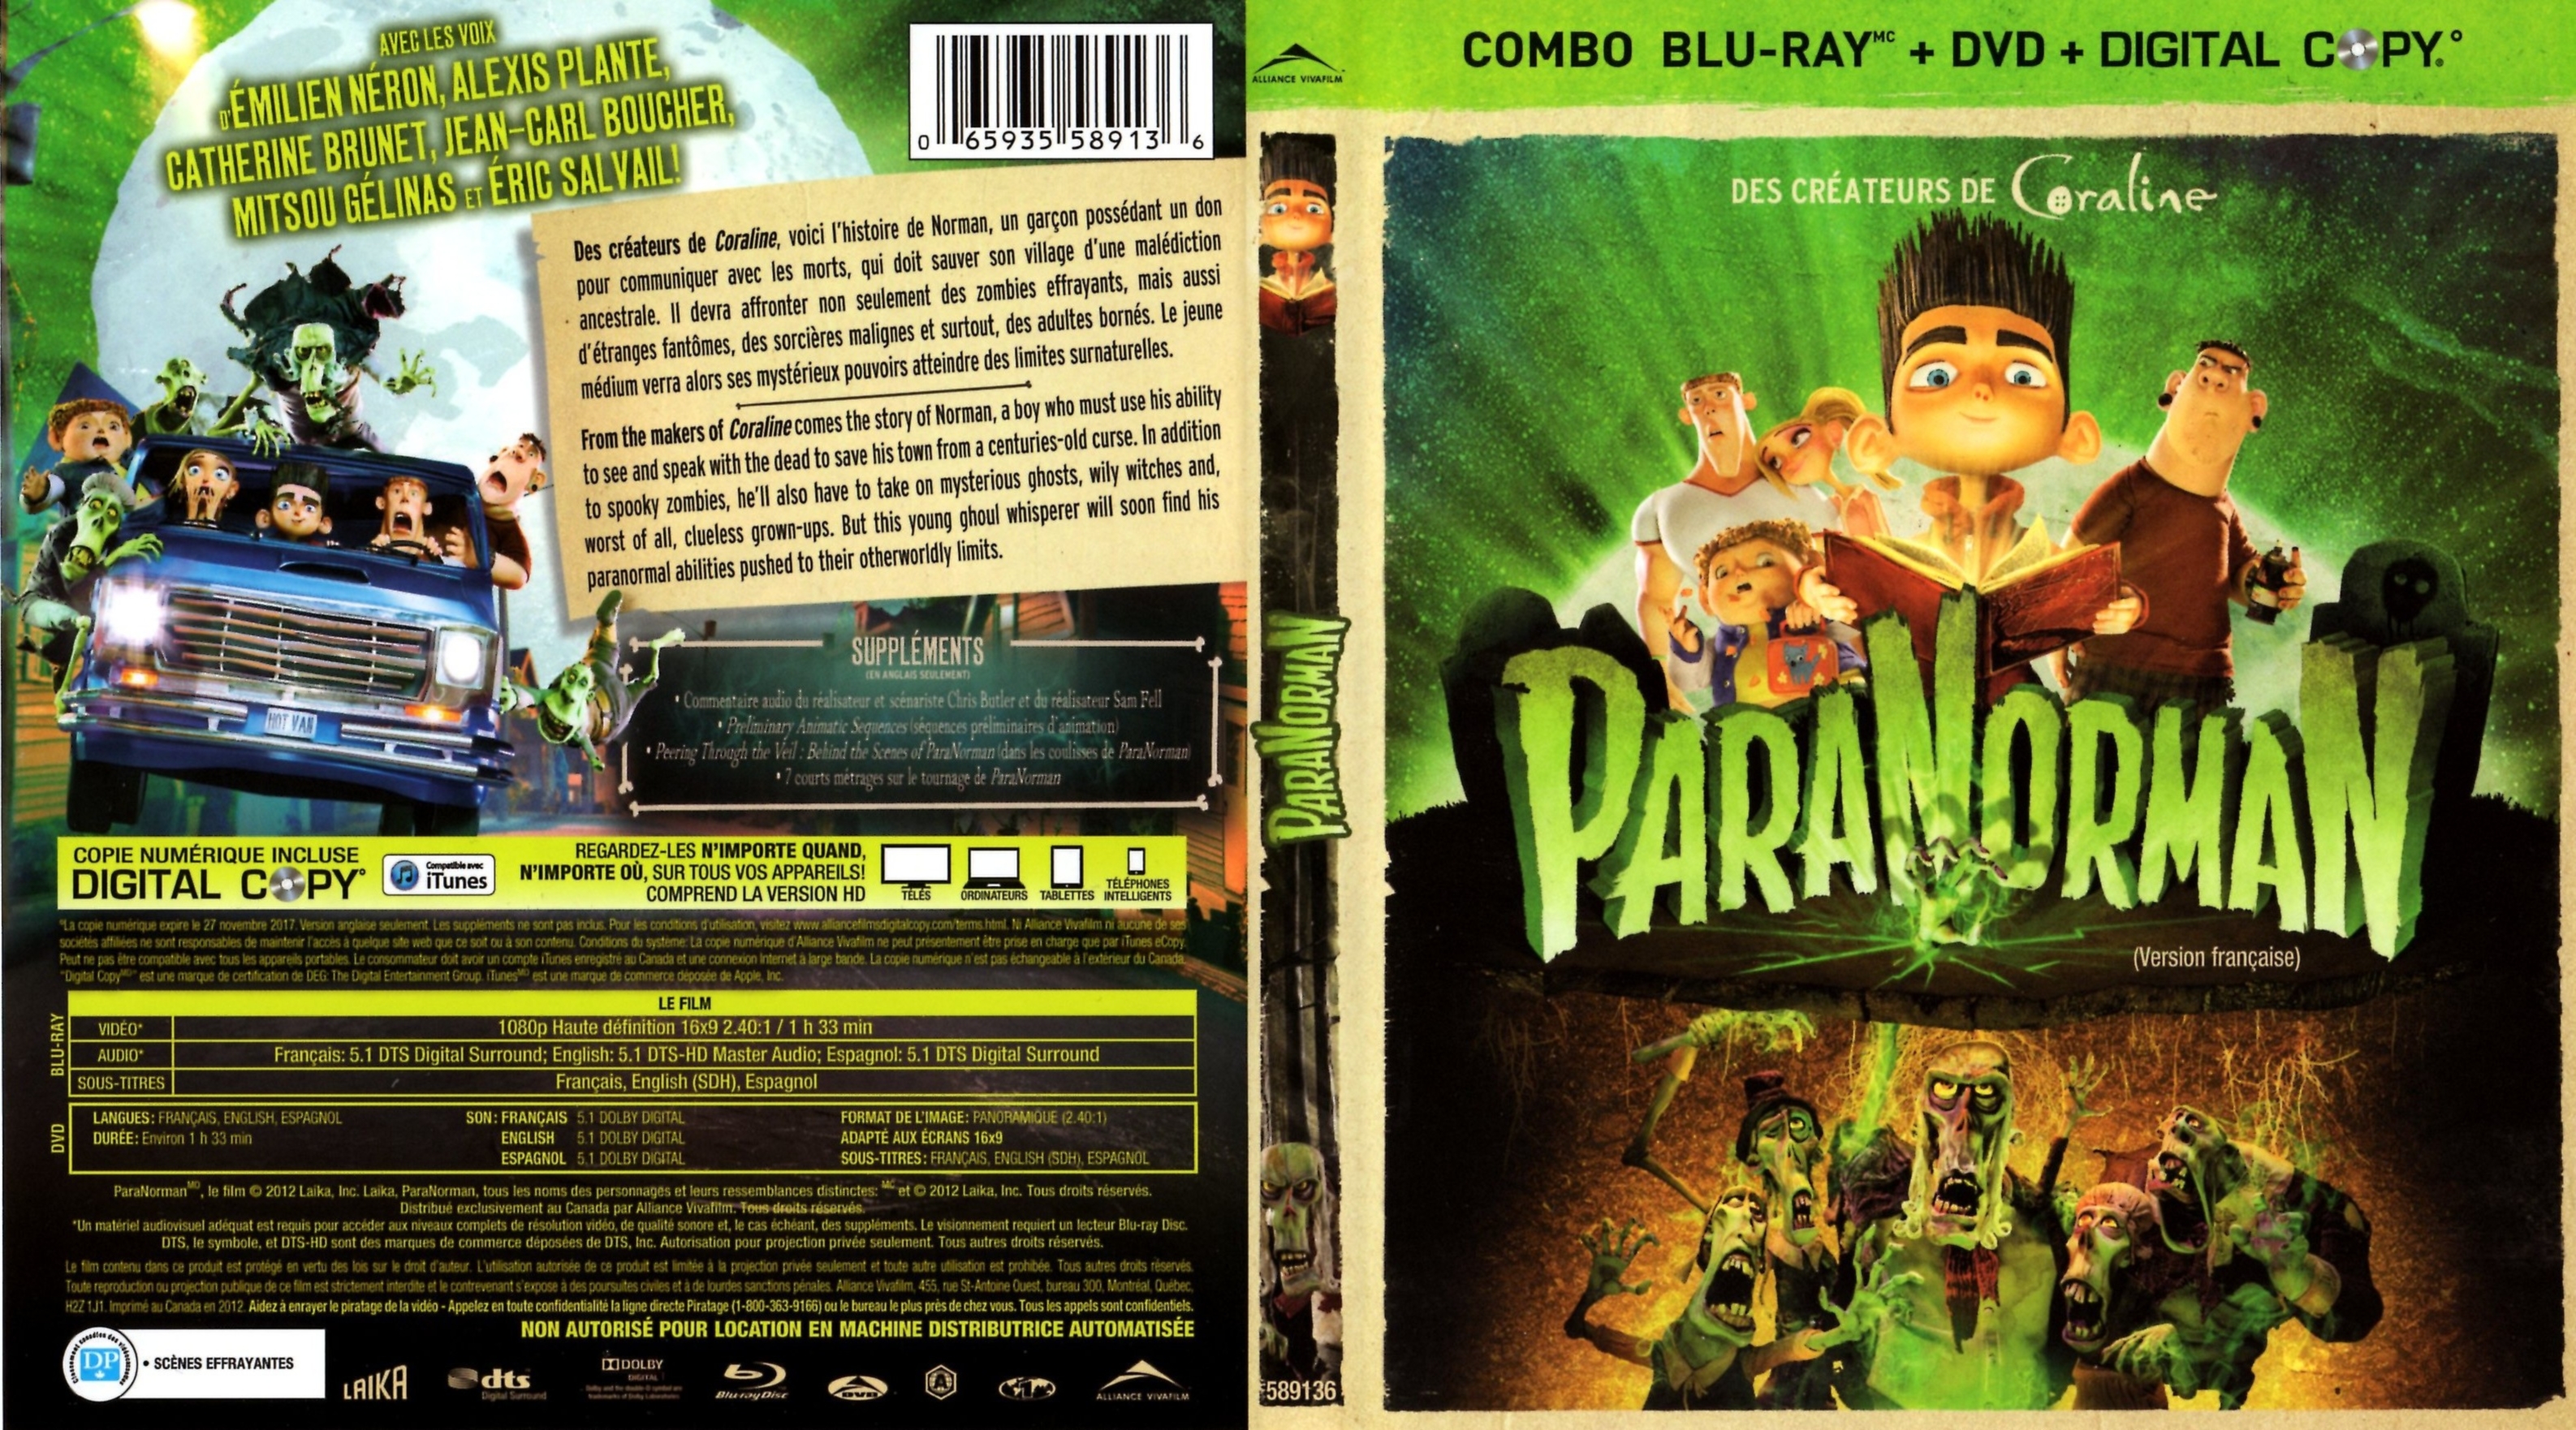 Jaquette DVD ParaNorman (Canadienne) (BLU-RAY)